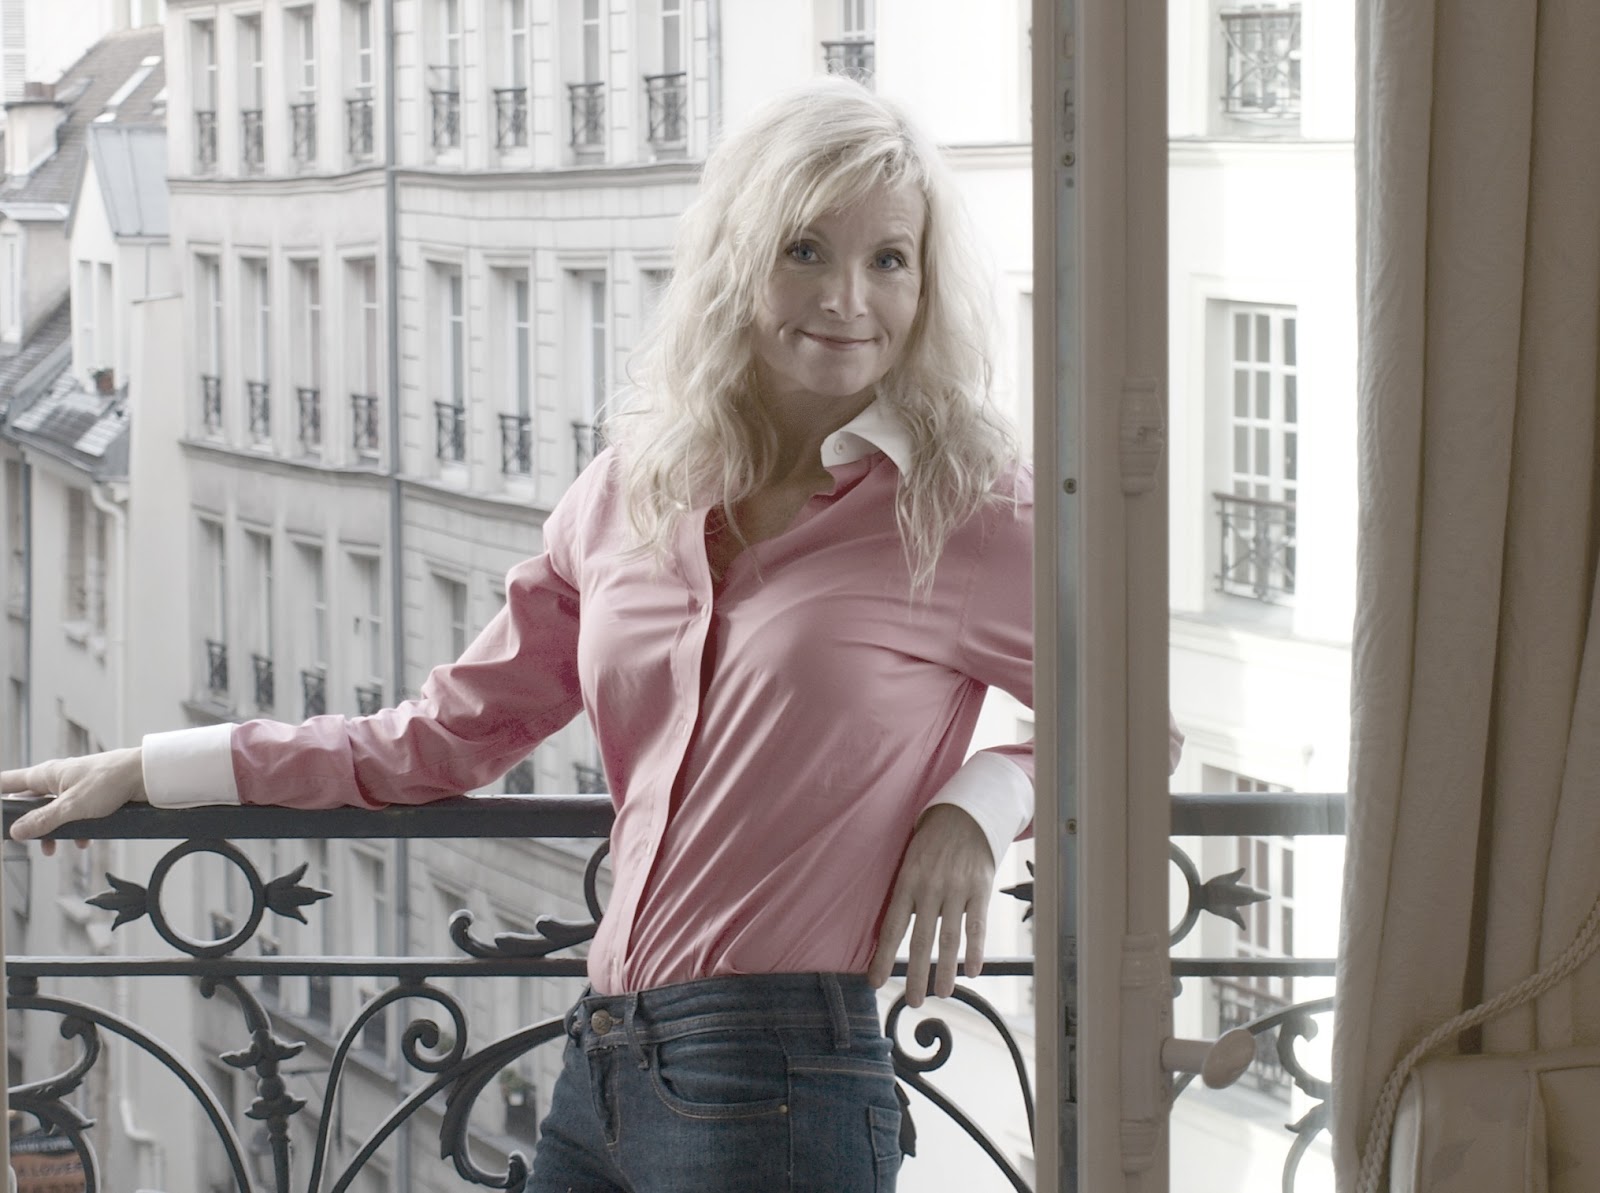 On our balcony in a Paris apartment - Hello Lovely Studio